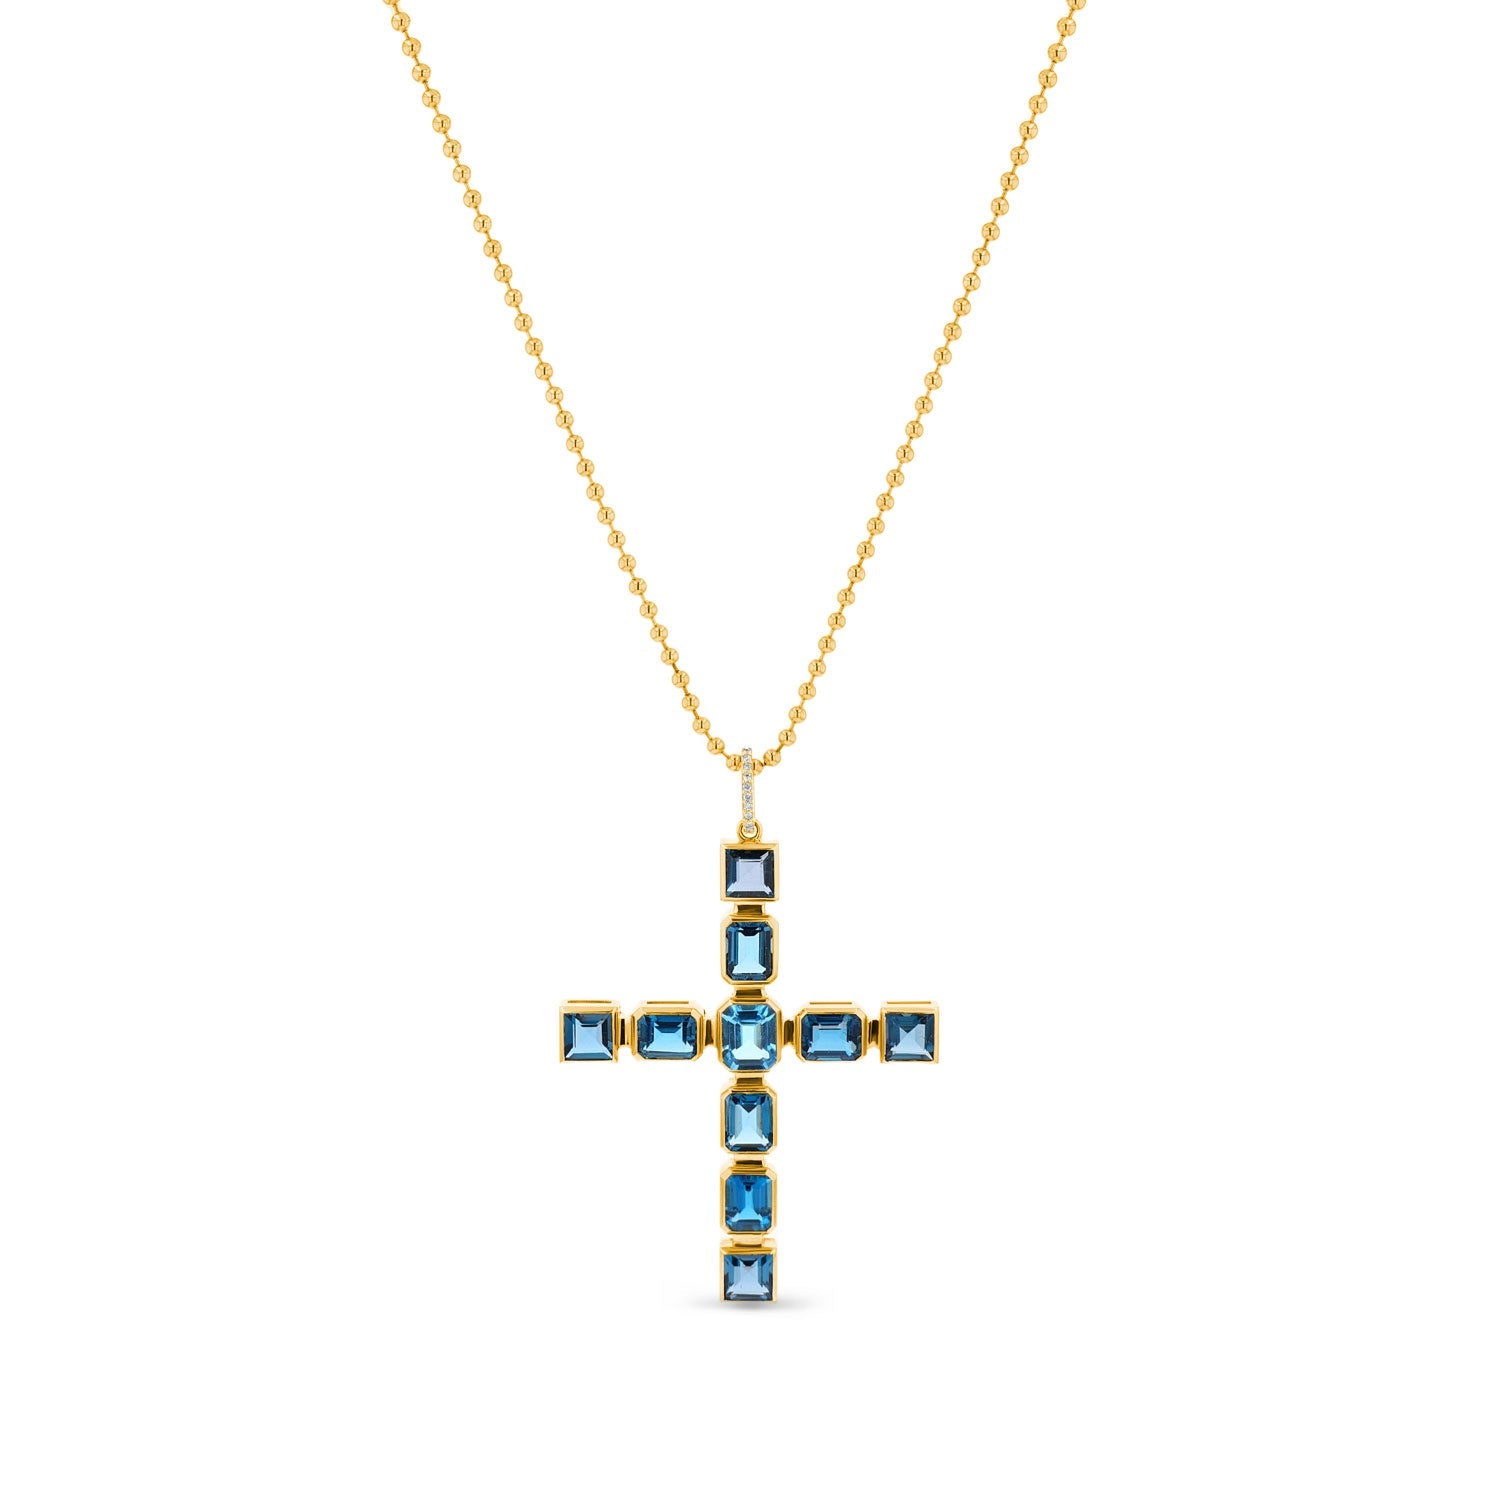 14k Gold and Blue Topaz Statement Cross Pendant Necklace SNG00164 - TBird